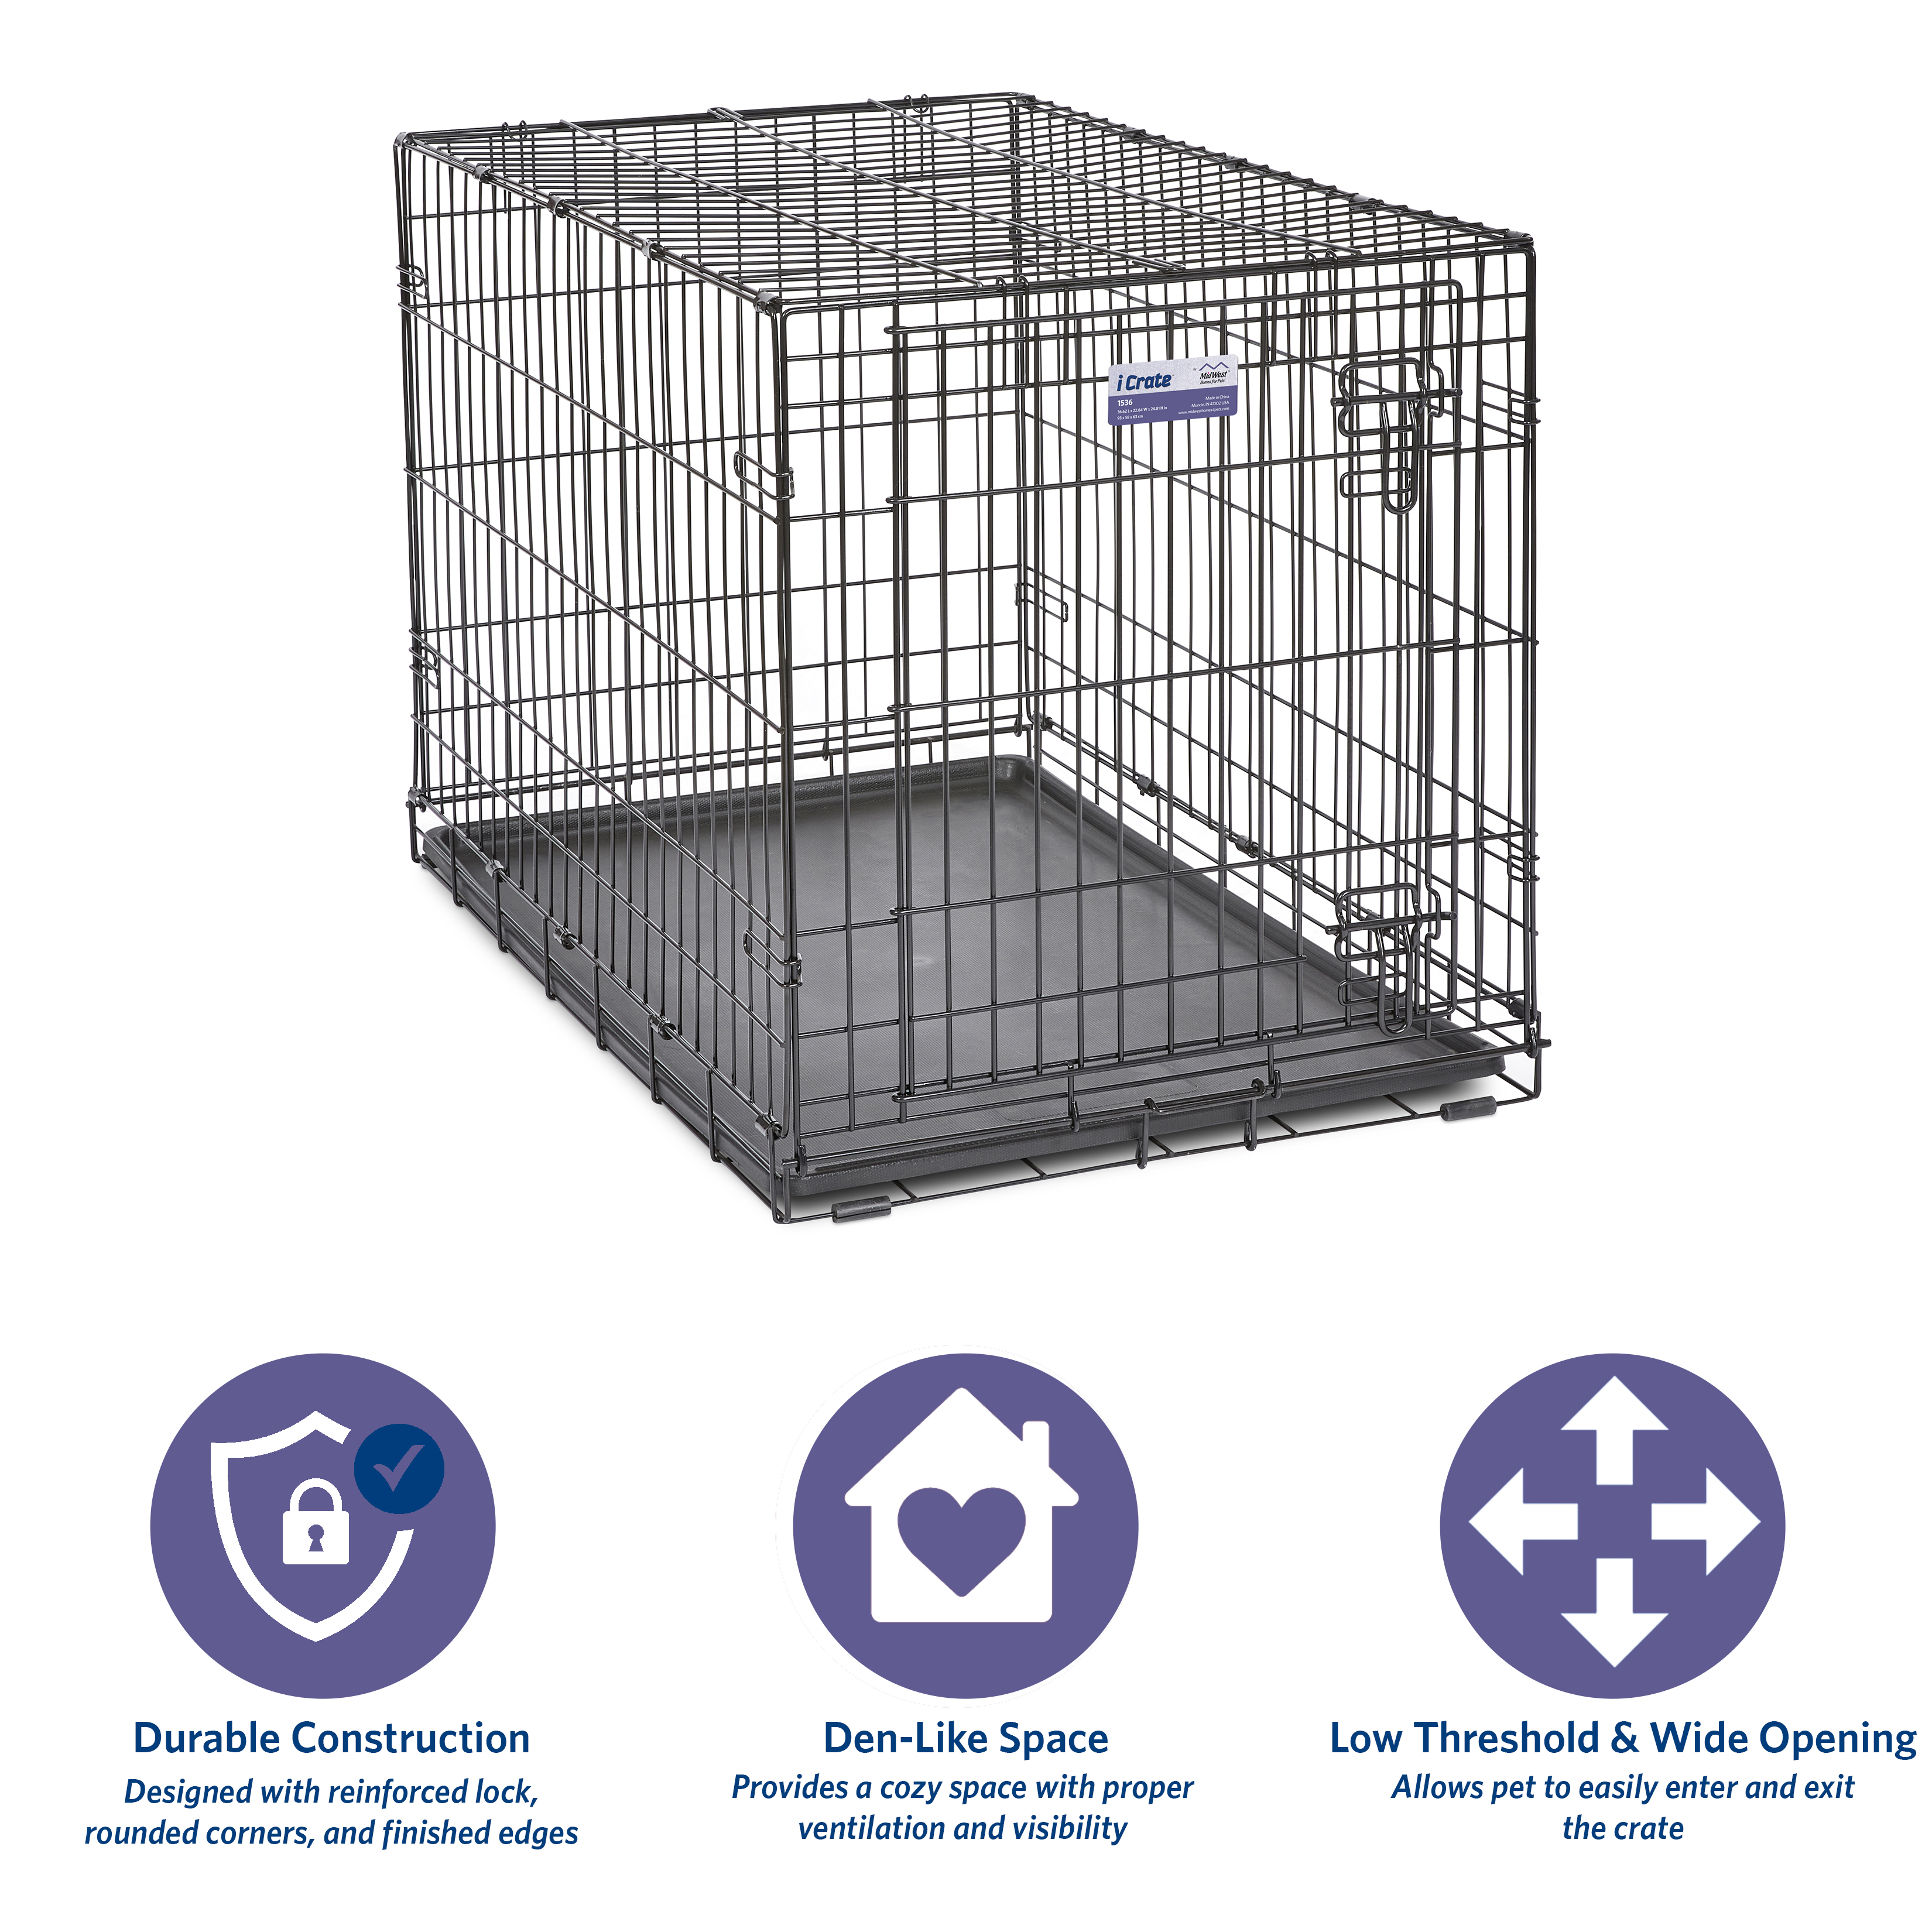 MidWest Homes for Pets Newly Enhanced Single Door iCrate Dog Crate, Includes Leak-Proof Pan, Floor Protecting Feet, Divider Panel & New Patented, 36 Inch - image 4 of 9